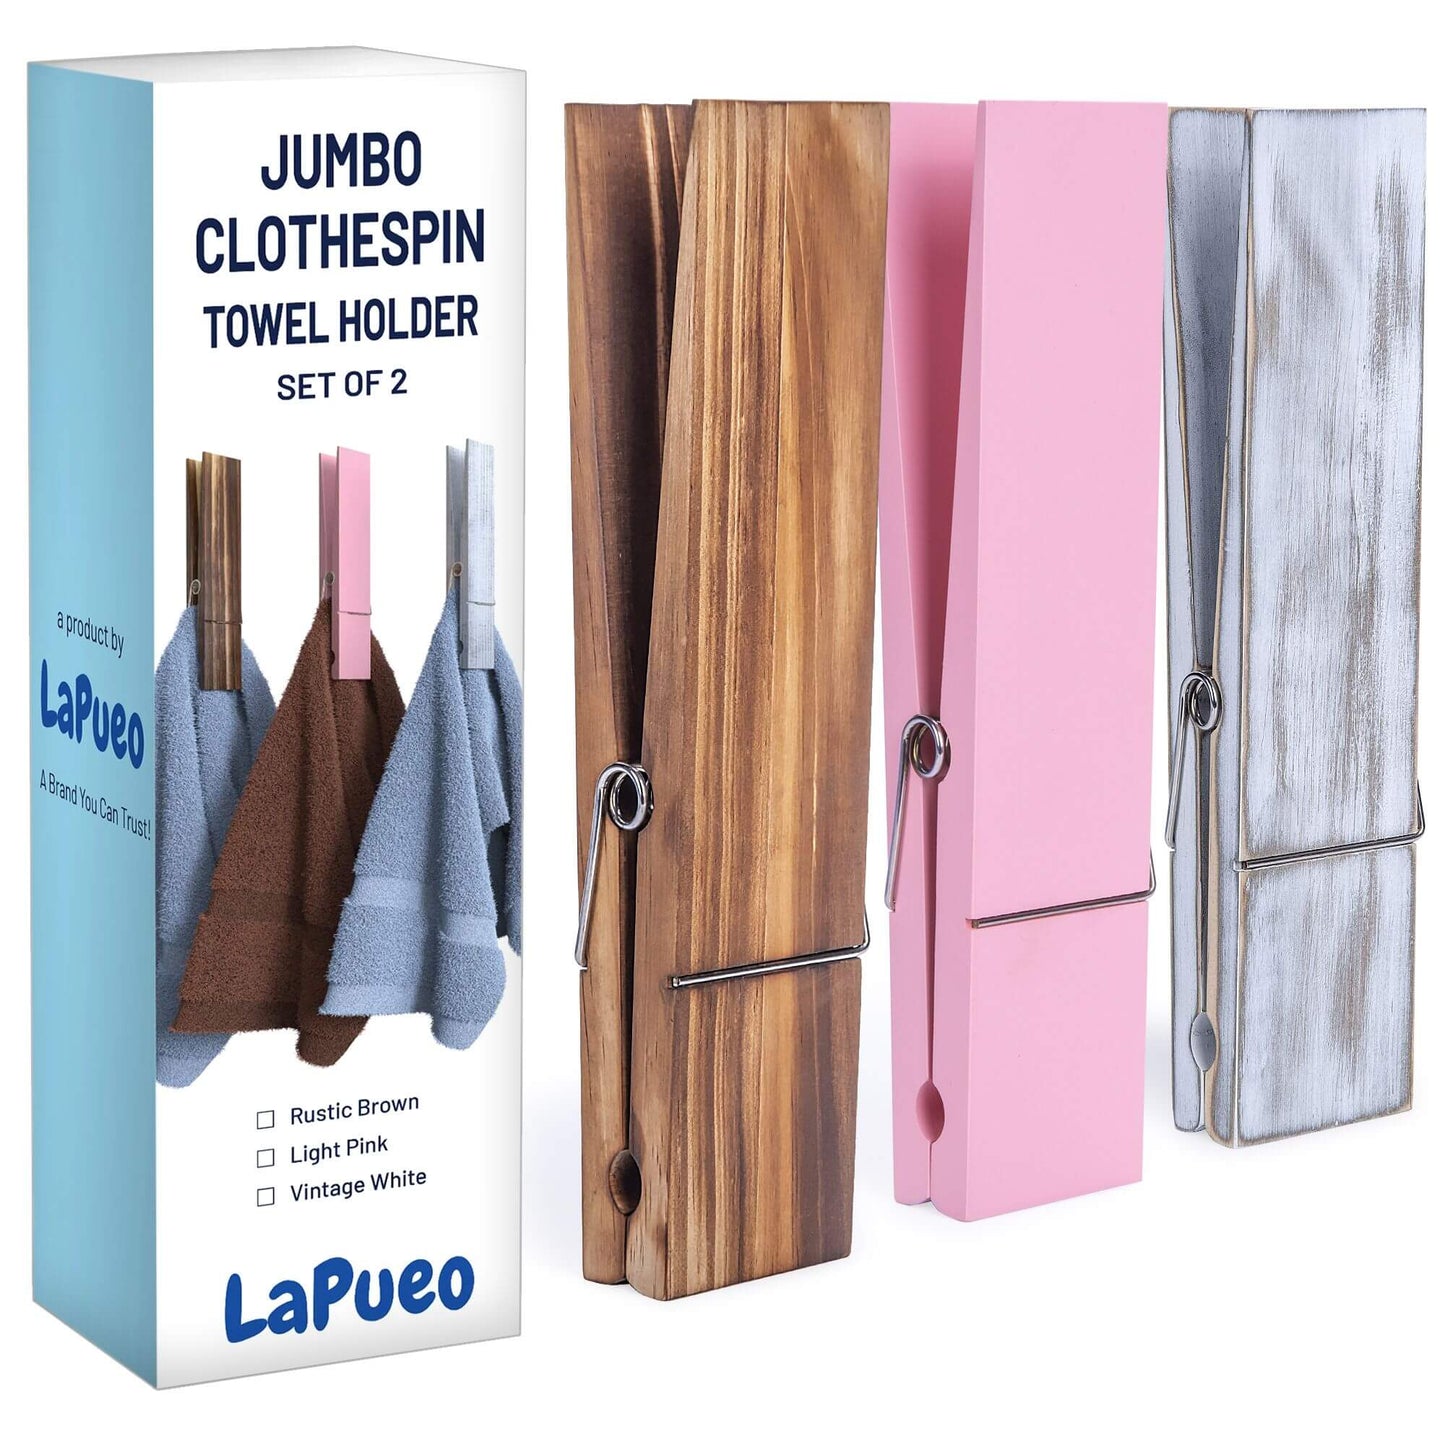 jumbo clothespin towel holders in 3 colors, pink, vintage white, rustic brown set of two lapueo towel hanger wall wood